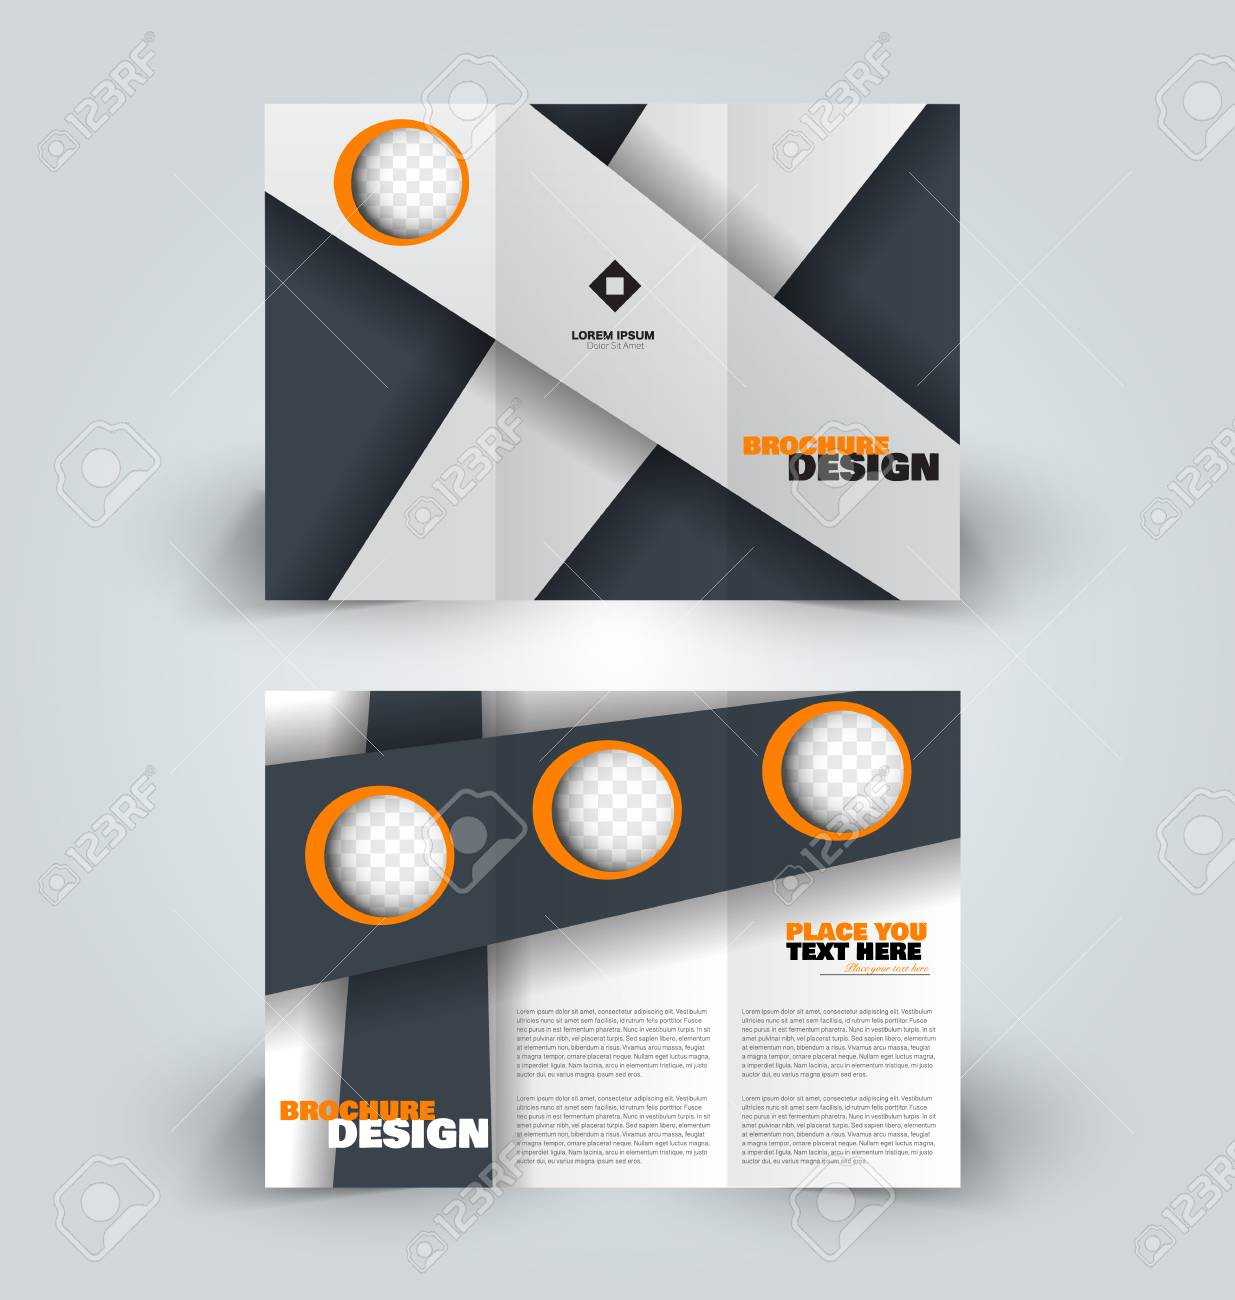 Brochure Template. Creative Design Trend For Professional Corporate.. Within Professional Brochure Design Templates